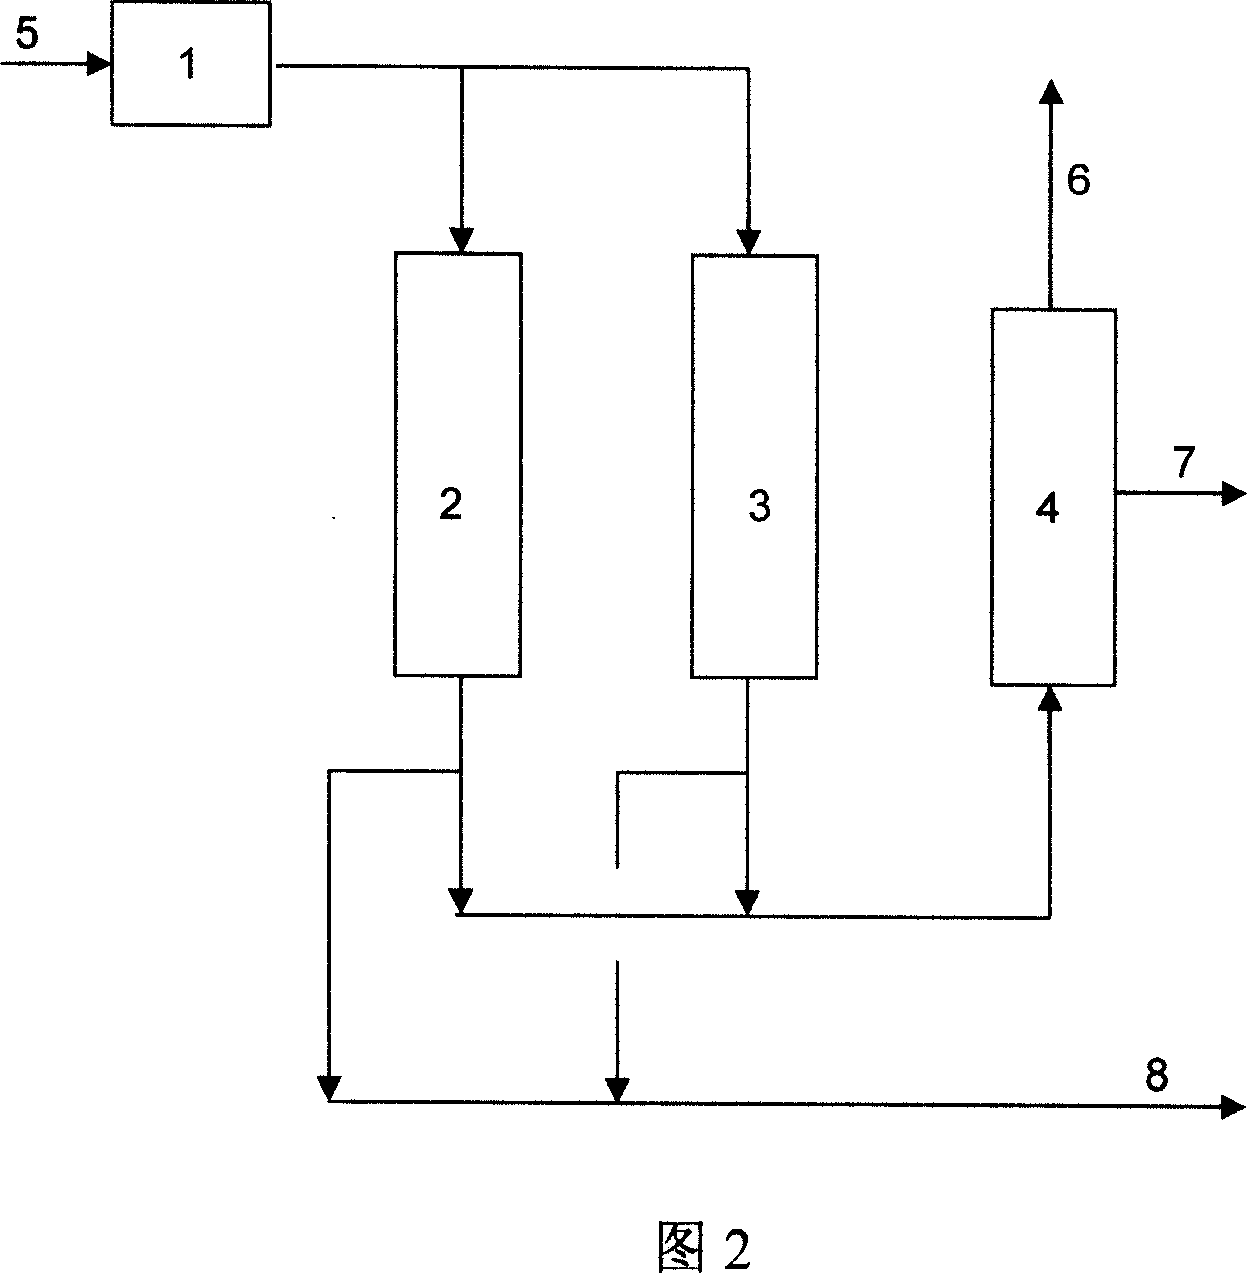 Coke oven gas adsorption reinforced catalytic hydrogen producing process and apparatus